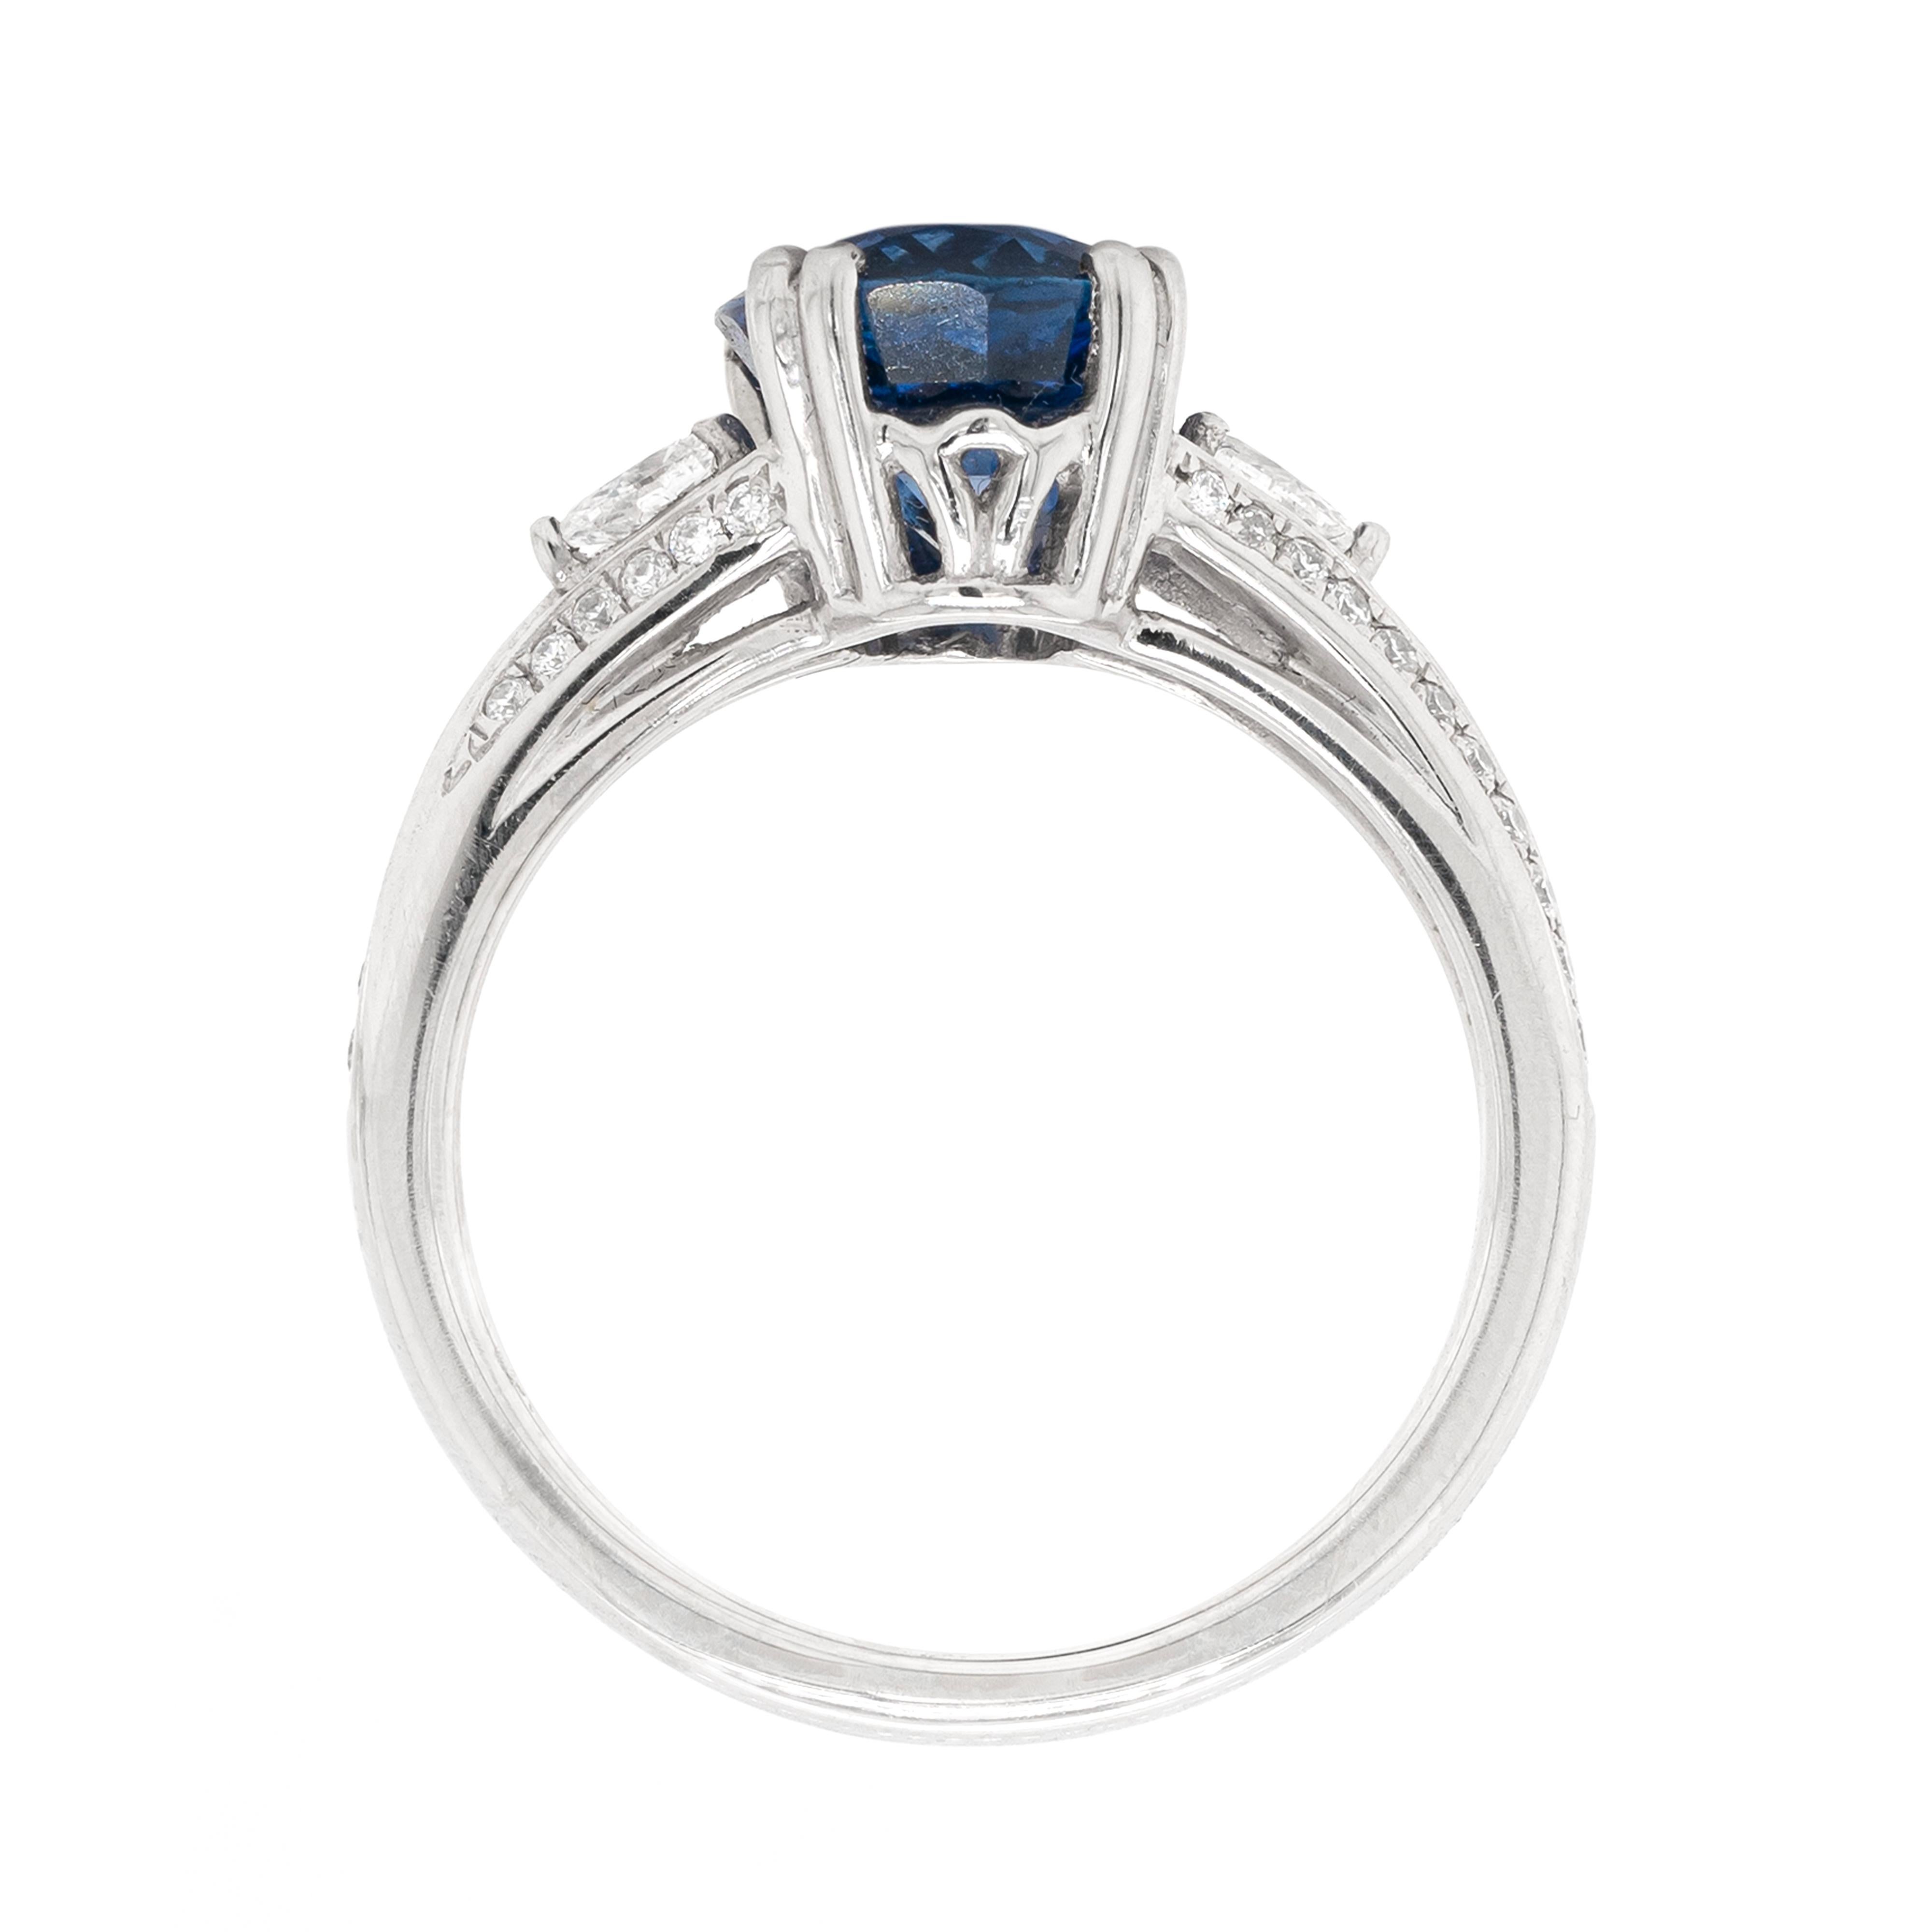 This wonderful platinum engagement ring features a gorgeous 2.88ct royal blue oval sapphire, mounted in a four double claw, open back setting. The vibrant gemstone sits atop an exquisite diamond set split shoulder shank and is beautifully